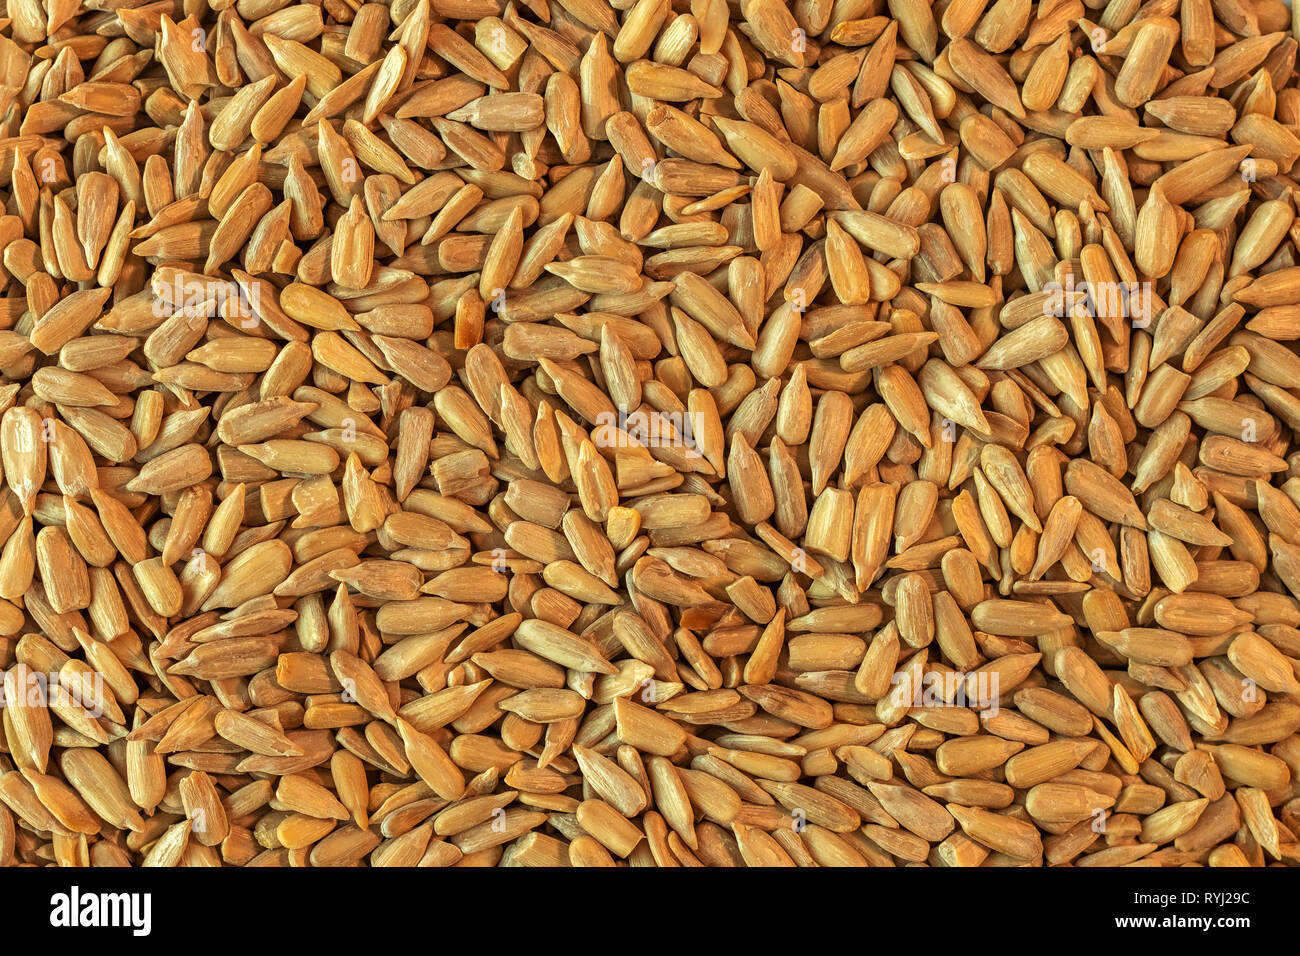 Hulled organic sunflower seed, top view as background Stock Photo